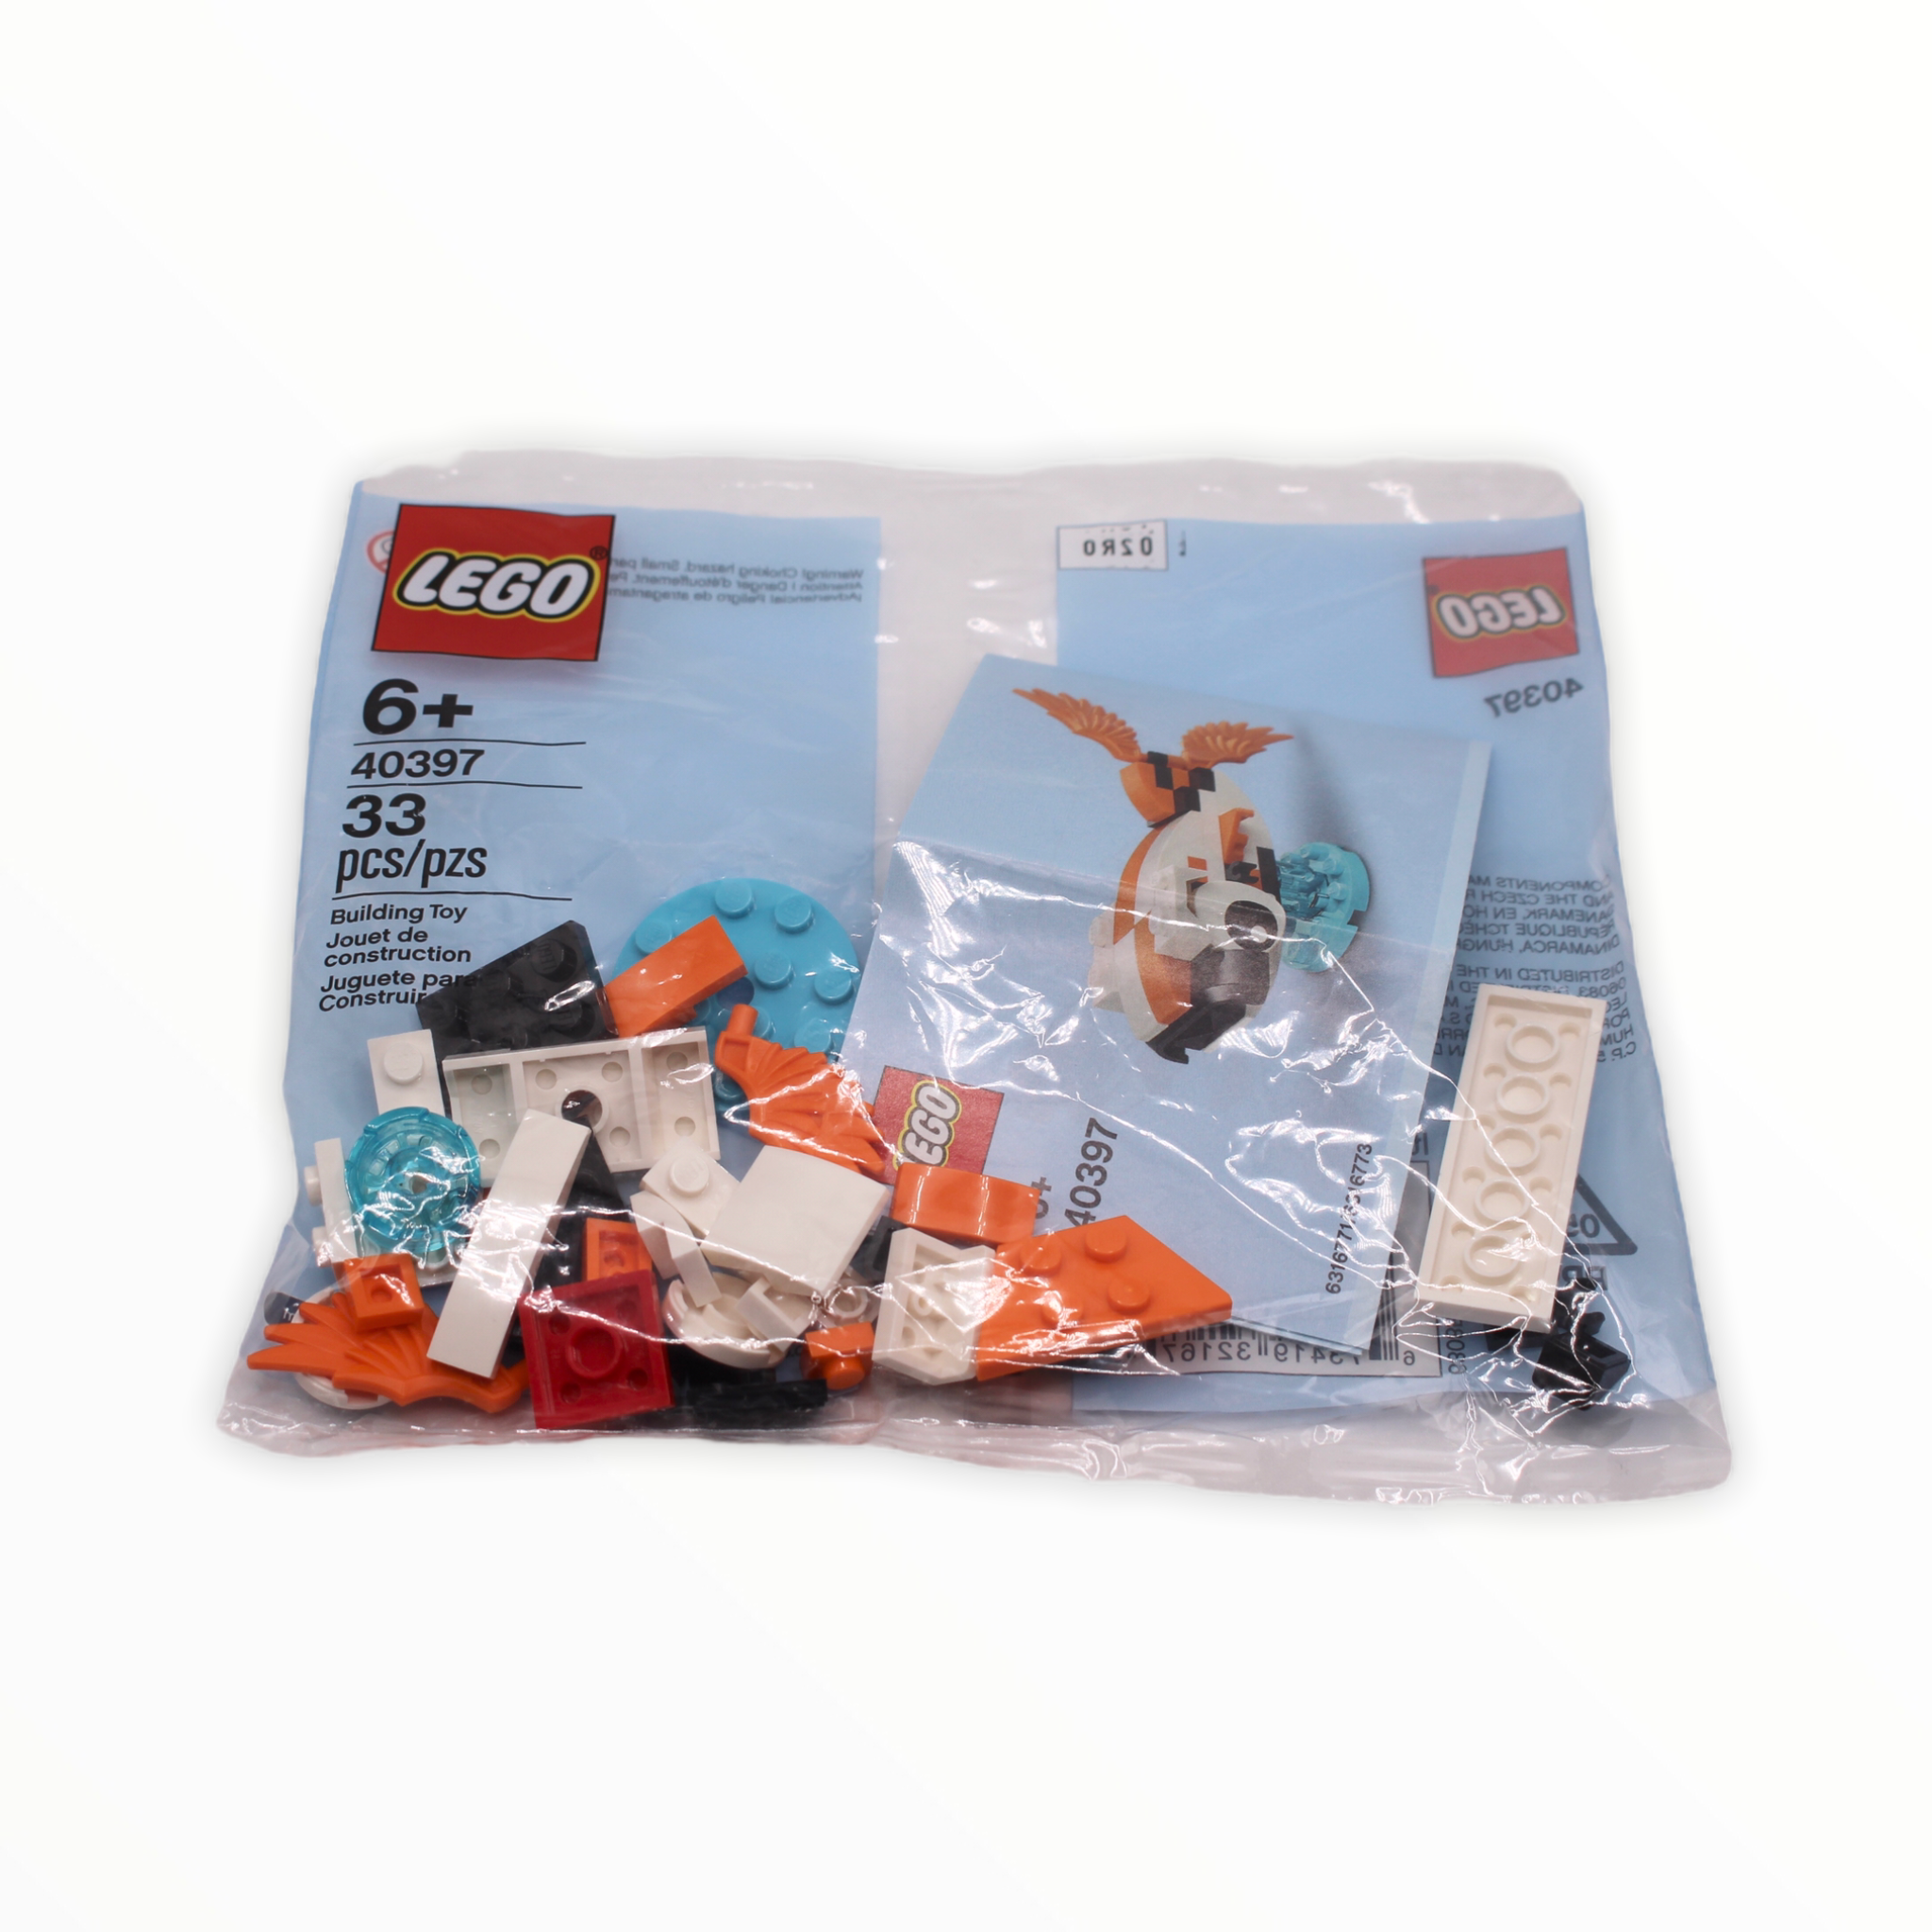 Polybag 40397 Monthly Mini Model Build Set - 2020 03 March, Fish